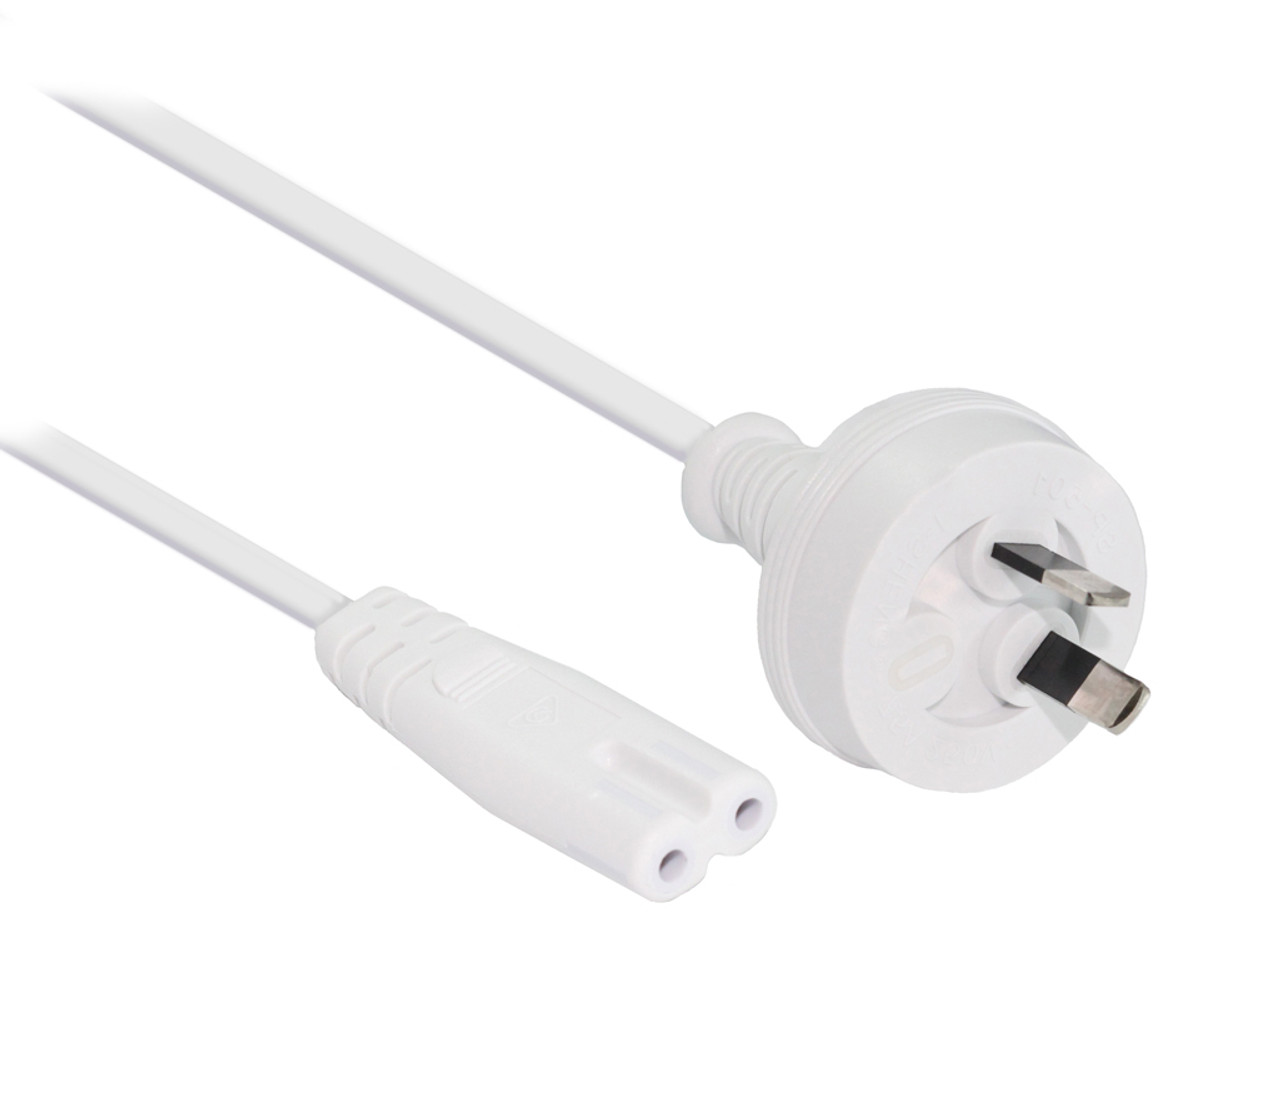 2M Wall To IEC C7 Power Cable in White